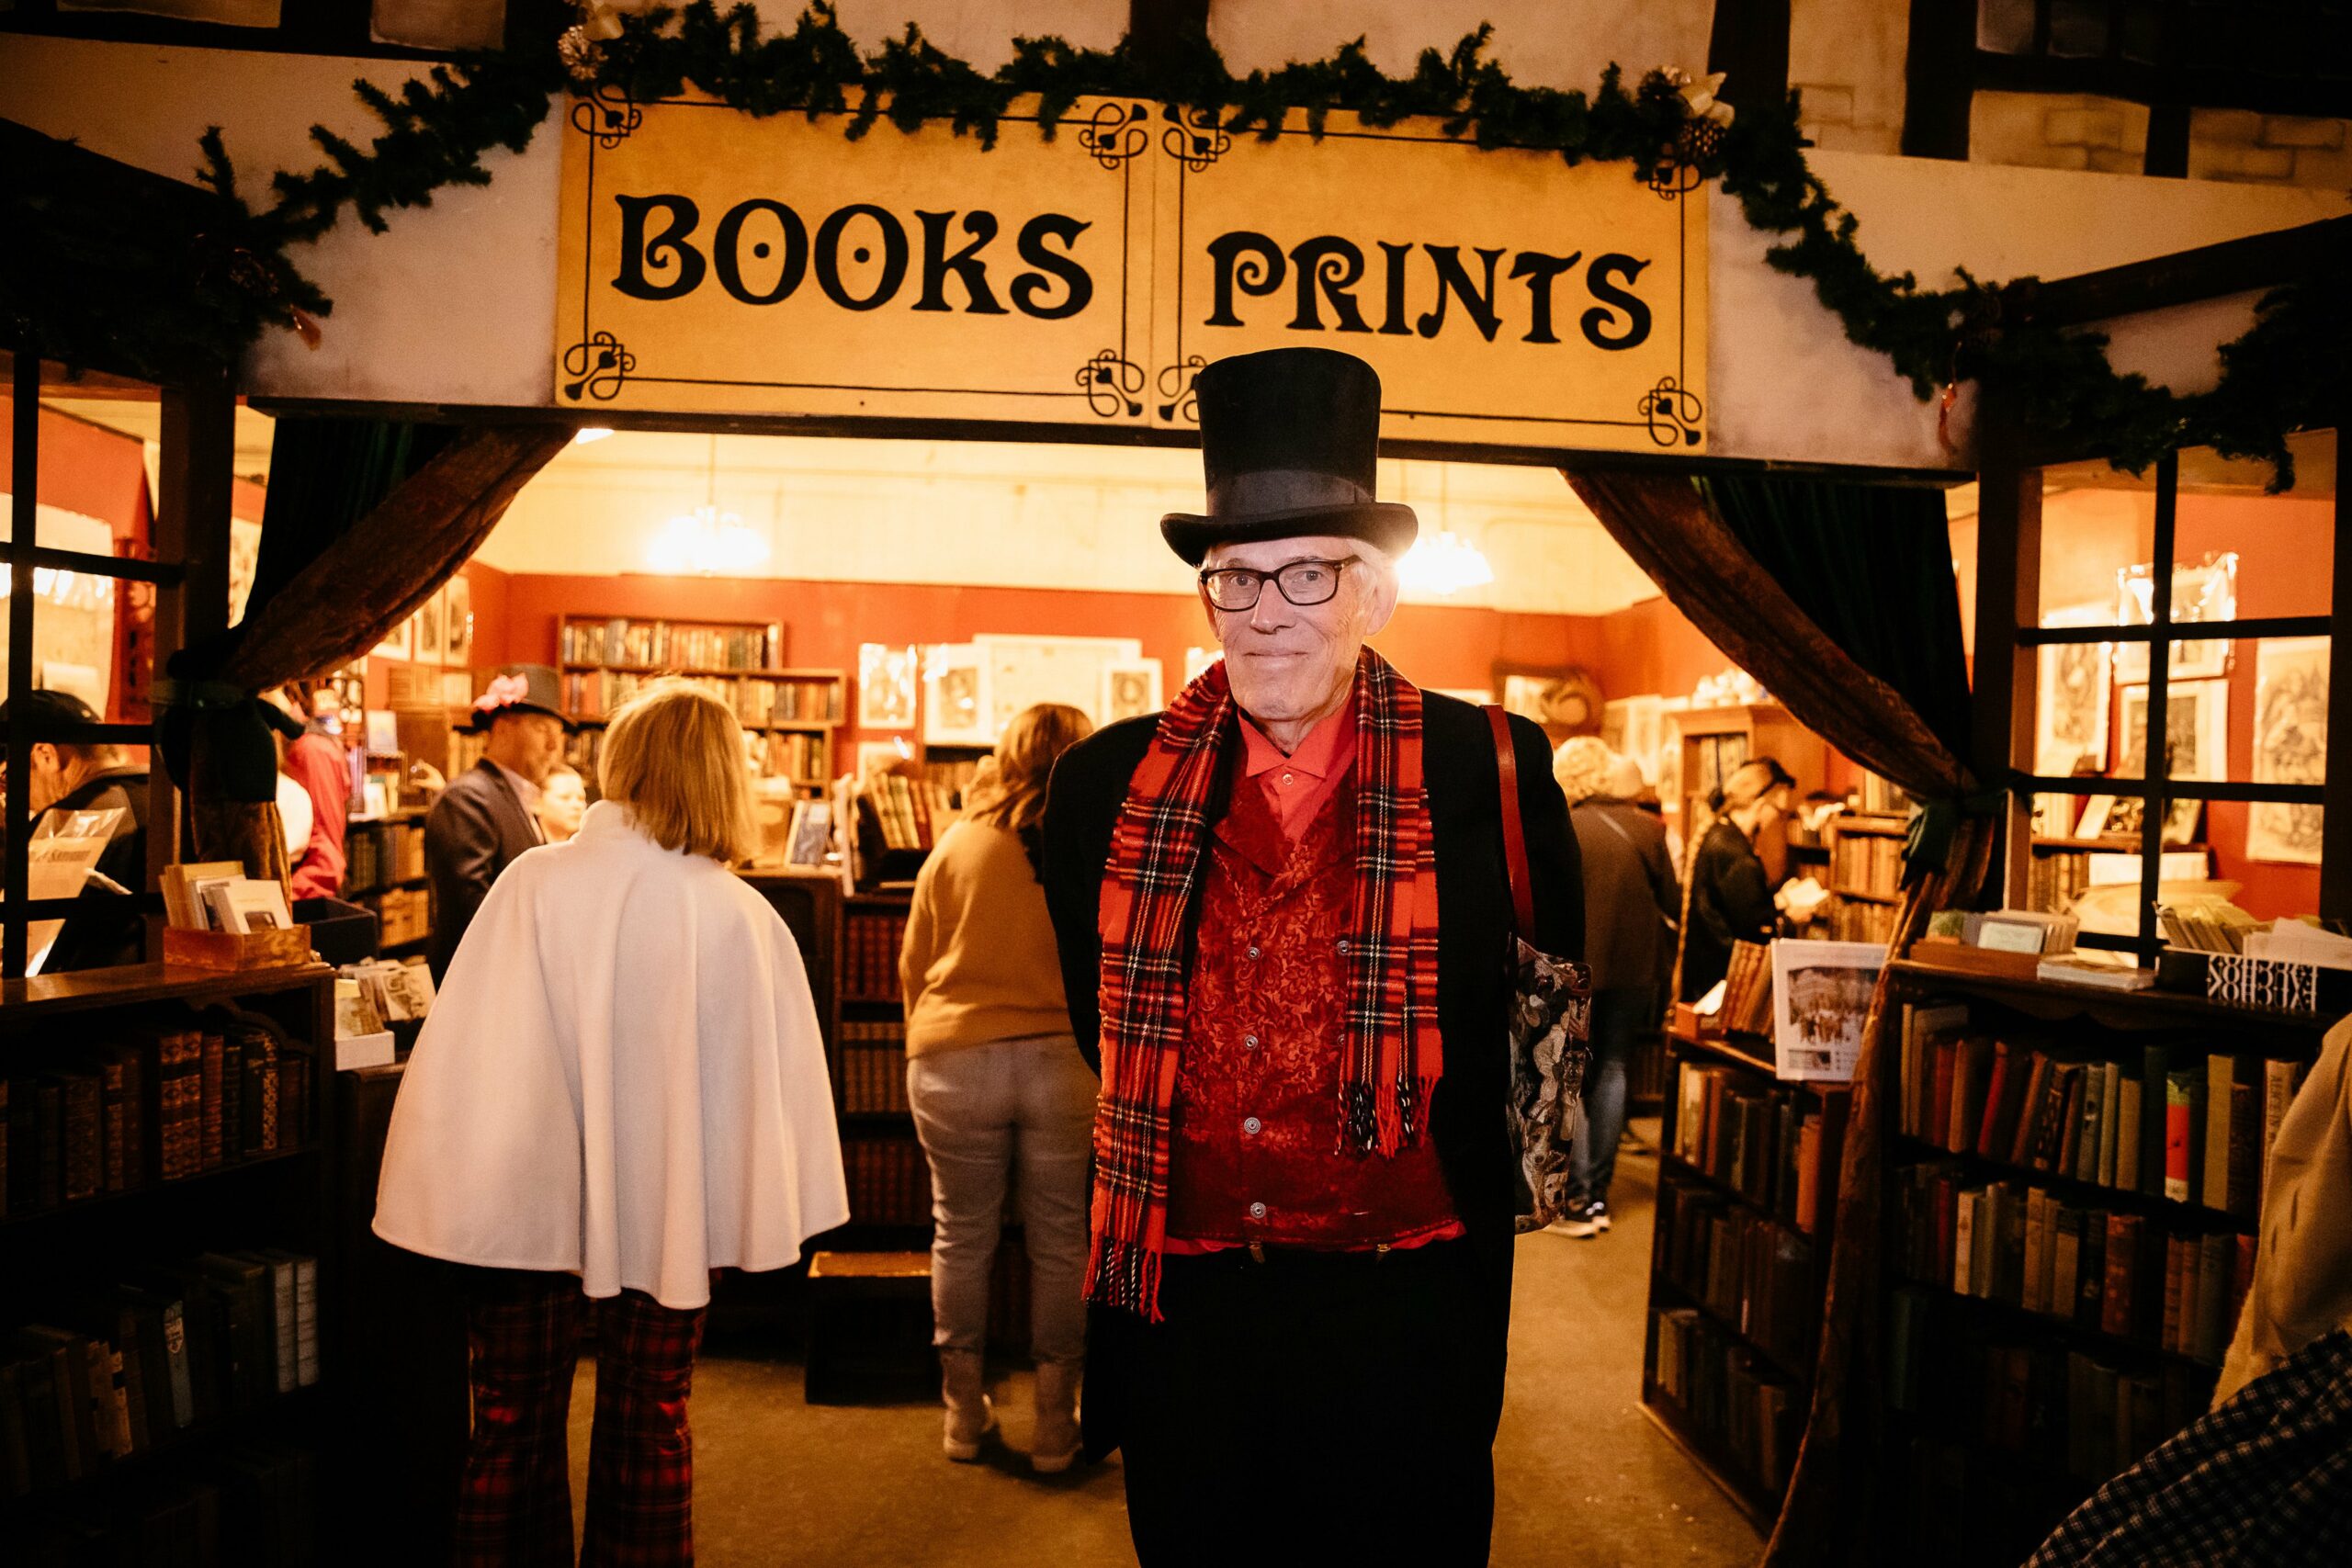 Sspotted at the Great Dickens Fair in SF